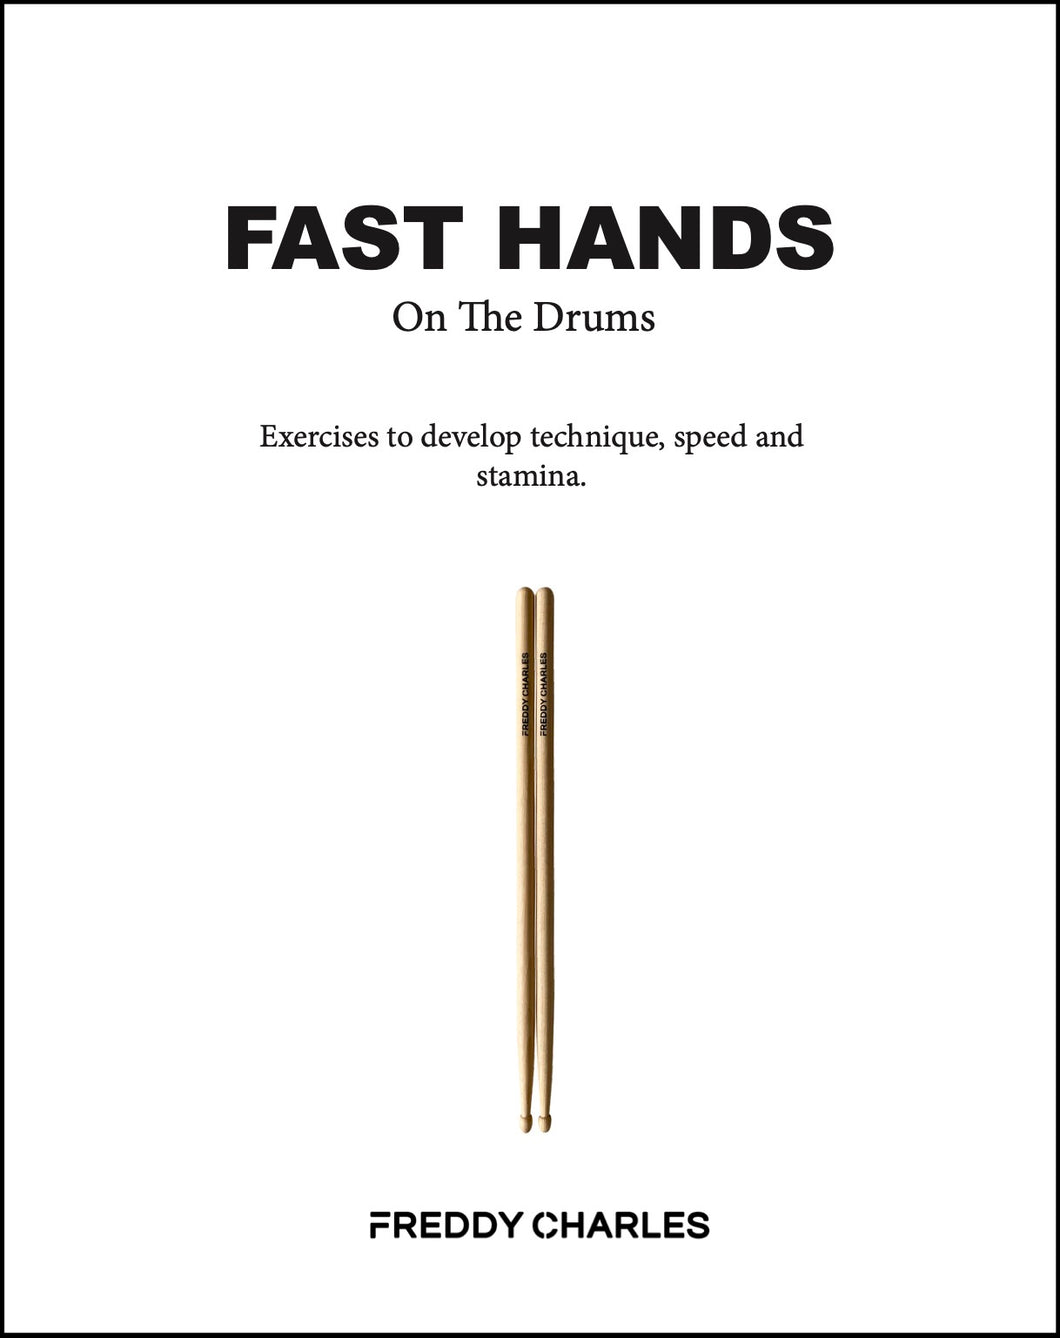 https://freddycharlesmusic.com/products/fast-hands-on-the-drums-ebook